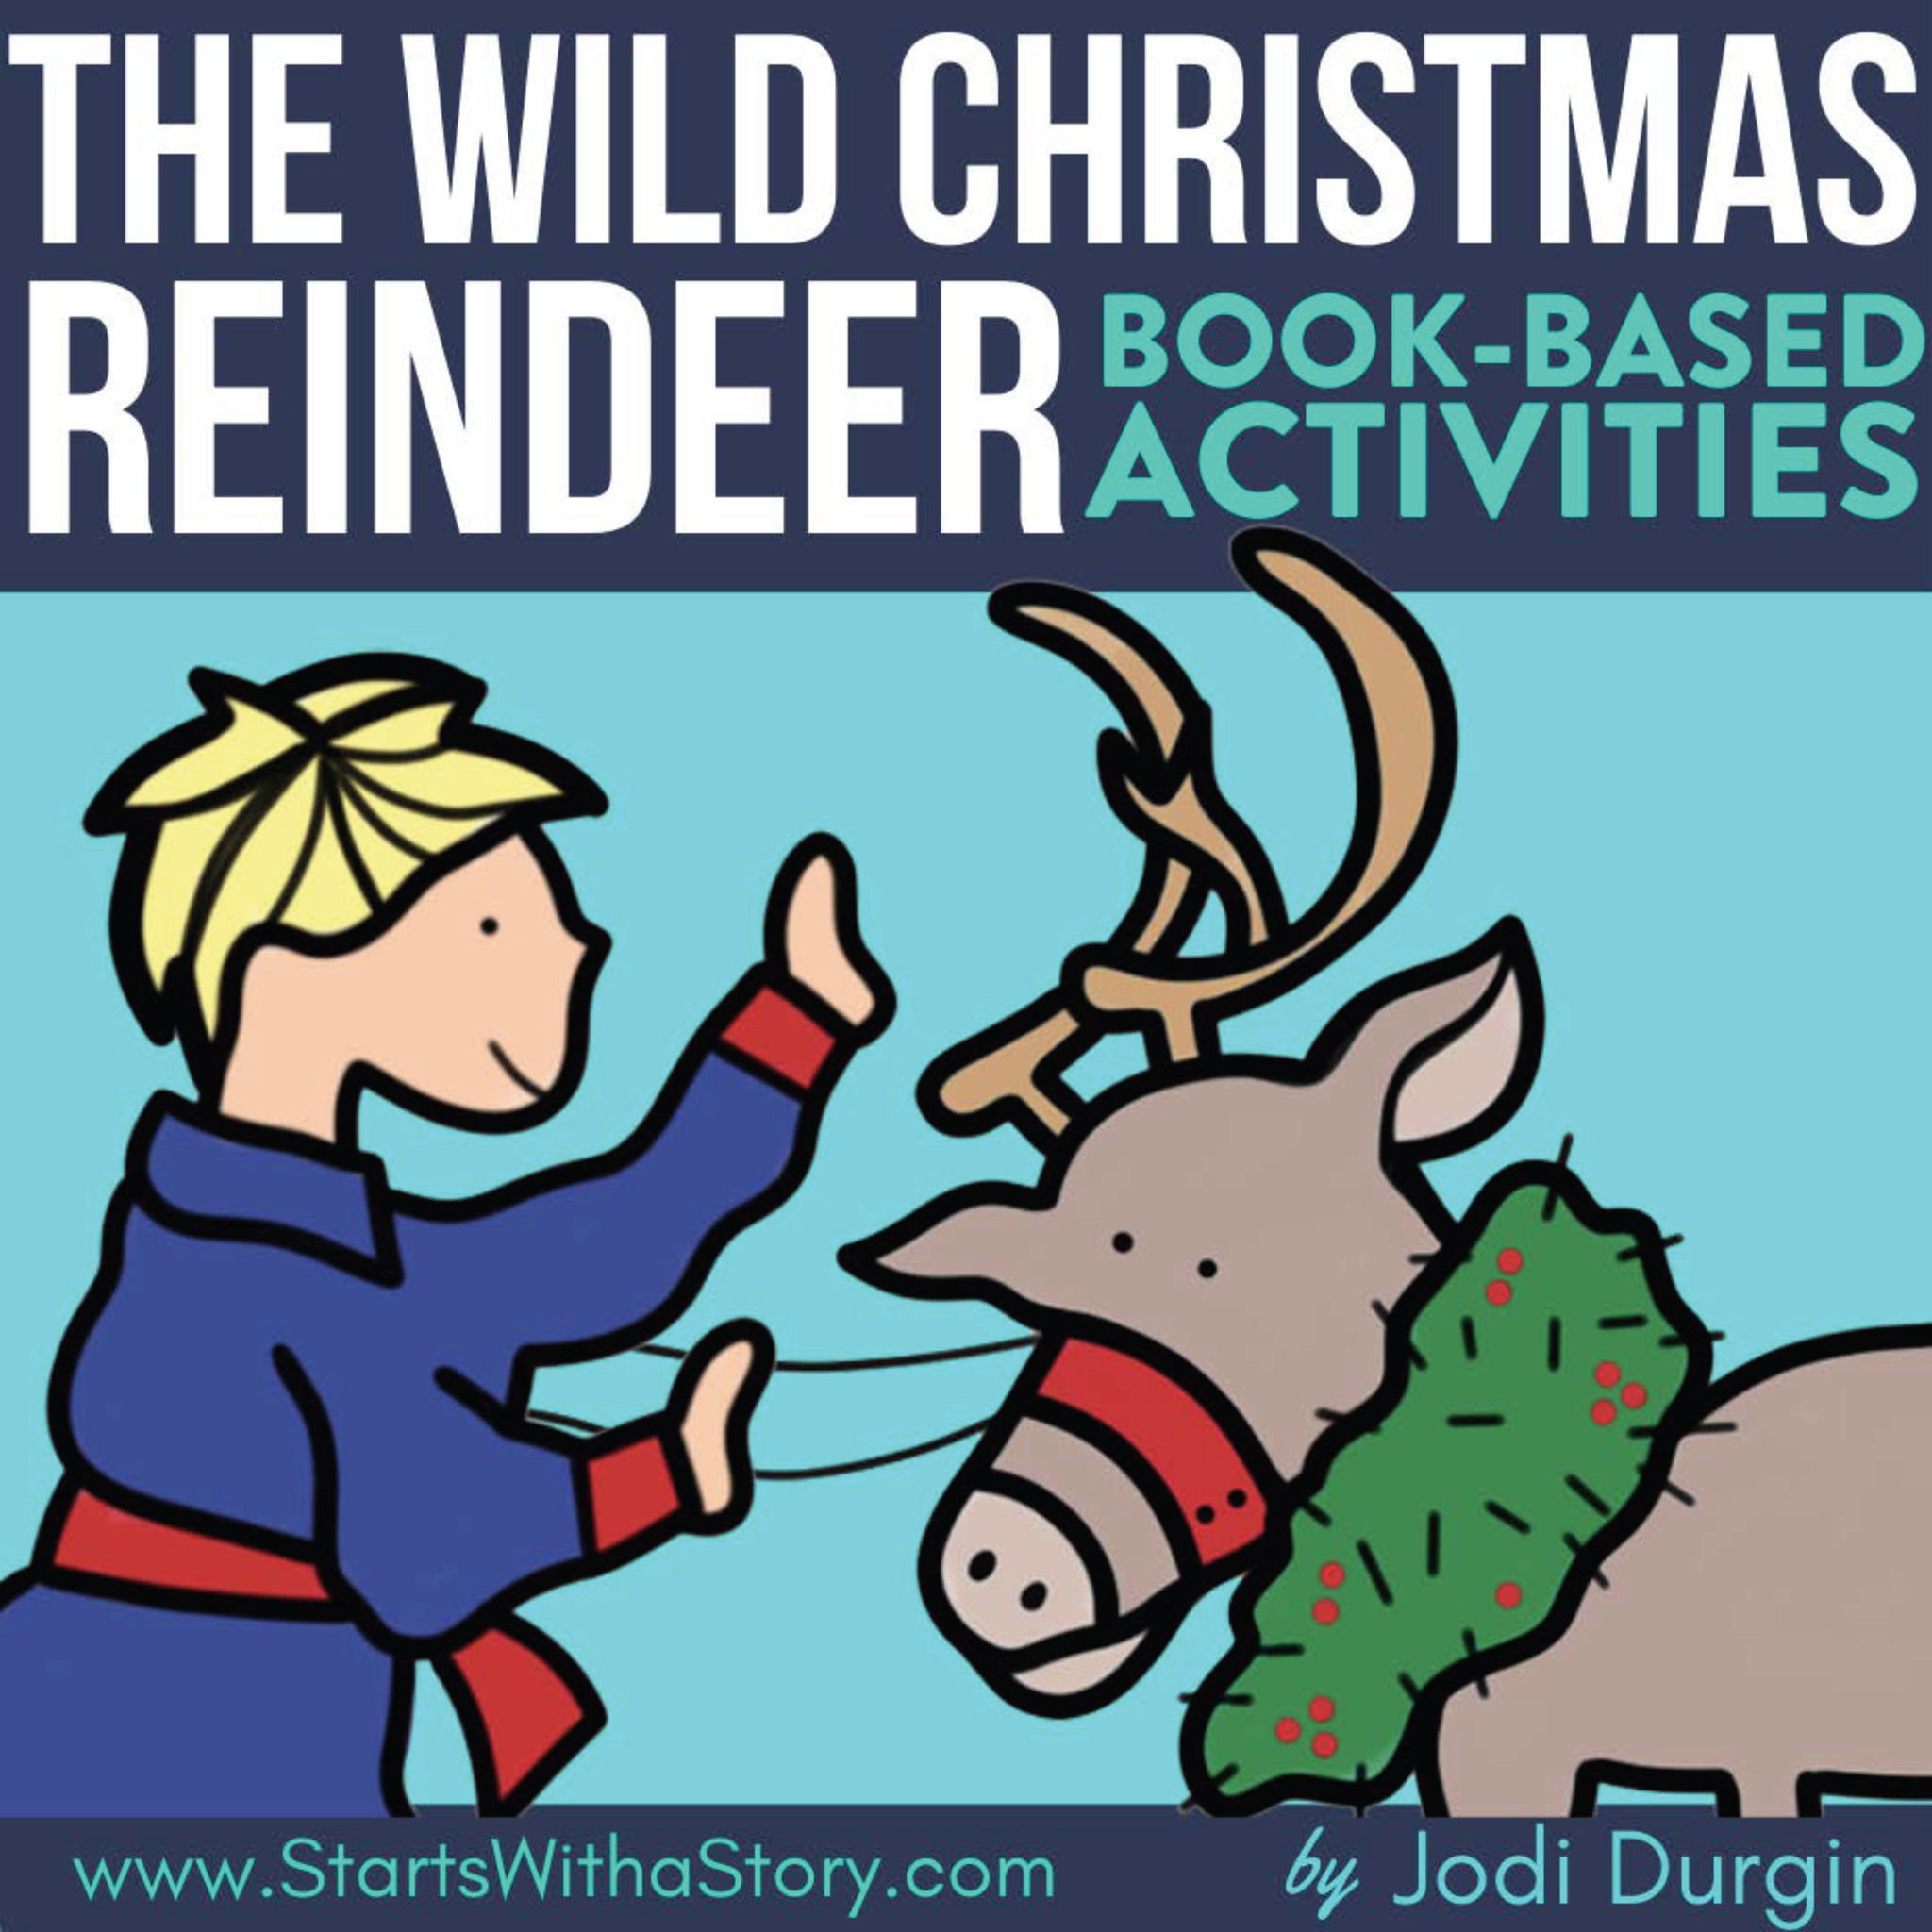 THE WILD CHRISTMAS REINDEER activities and lesson plan ideas